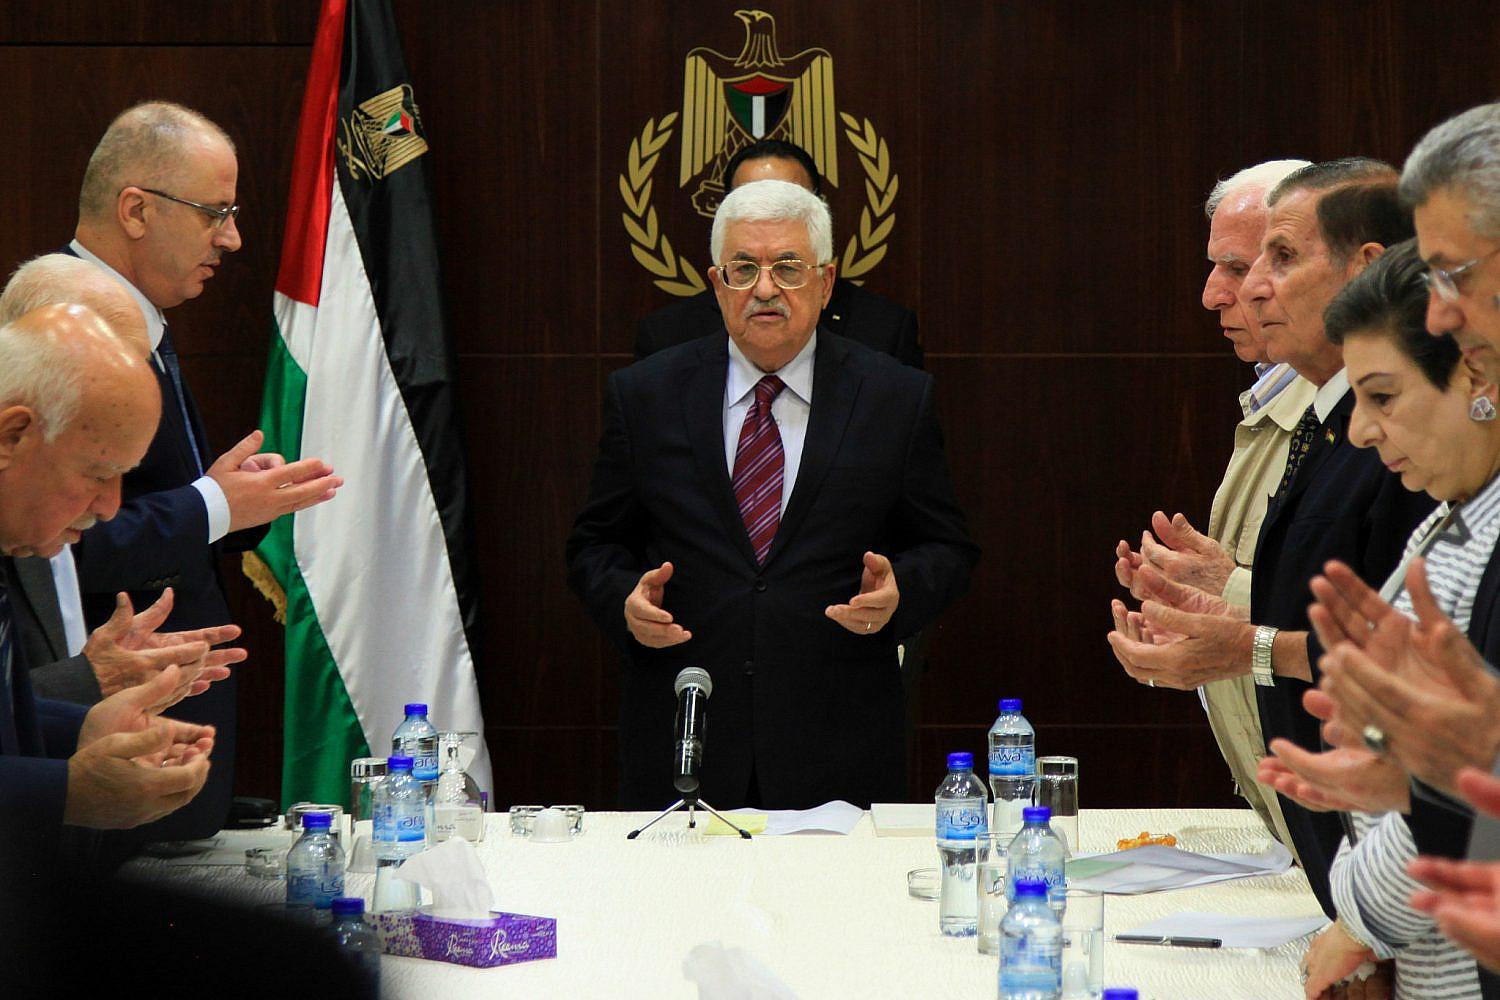 Palestinian President Mahmoud Abbas attends a Palestinian Liberation Organization (PLO) executive committee meeting in the West Bank city of Ramallah, Aug. 22, 2015. (Flash90)